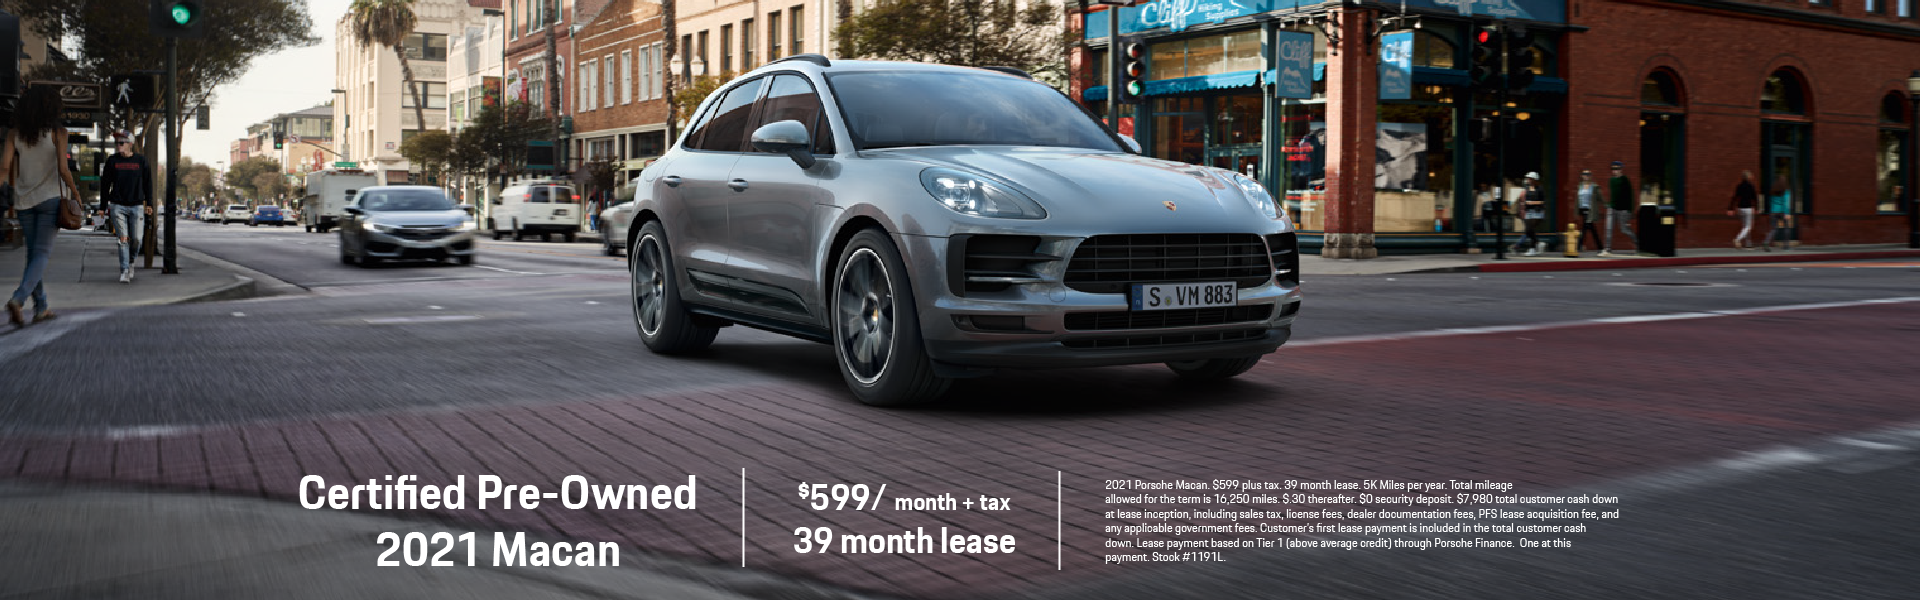 Certified Pre-Owned Macan available at Porsche Stevens Creek